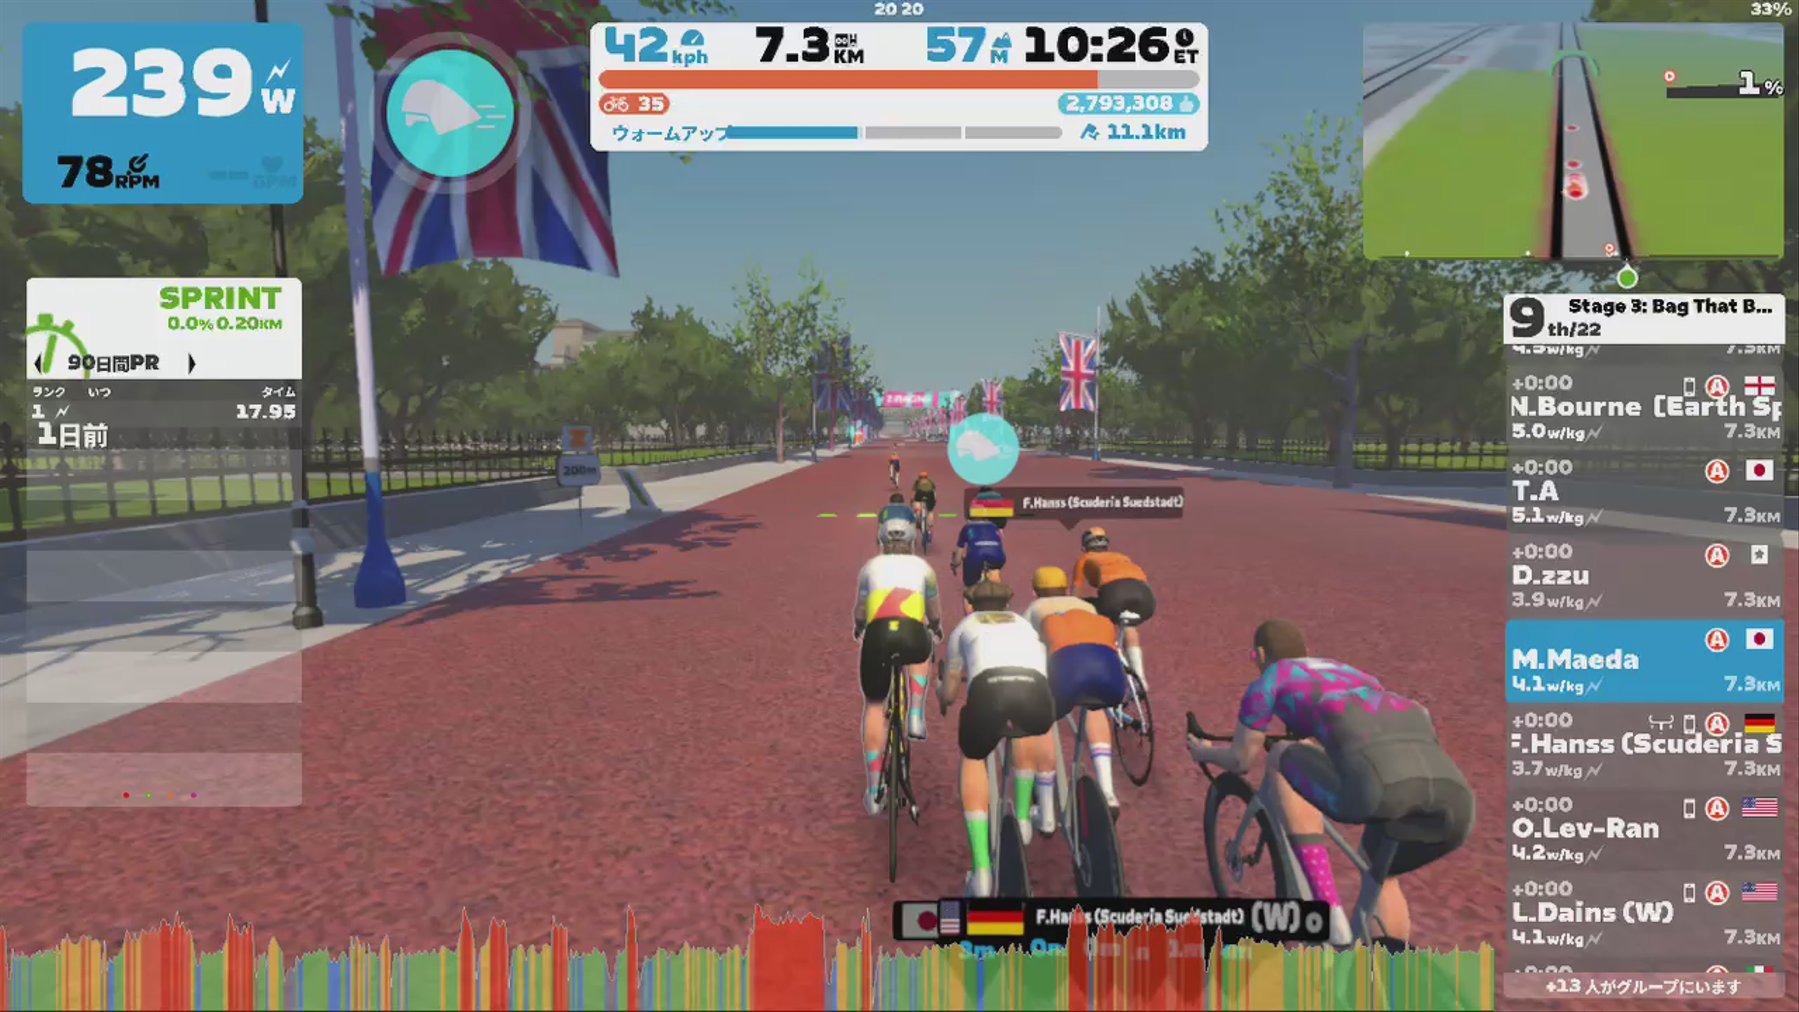 Zwift - Race: Stage 3: Bag That Badge - London Classique Reverse (A) on Classique Reverse in London